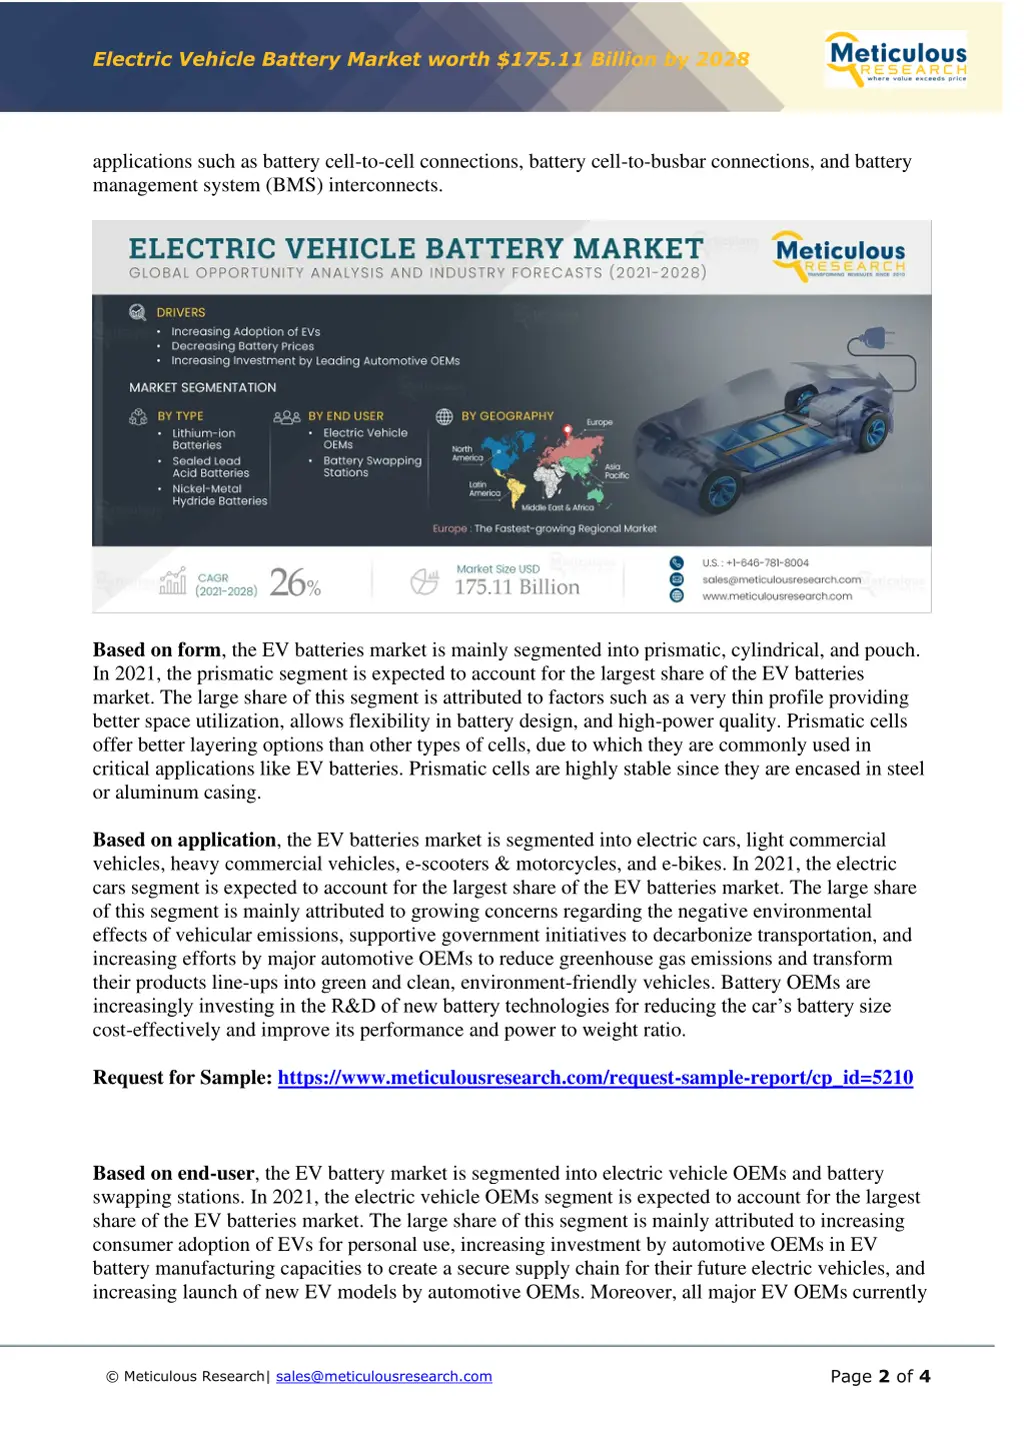 electric vehicle battery market worth 2